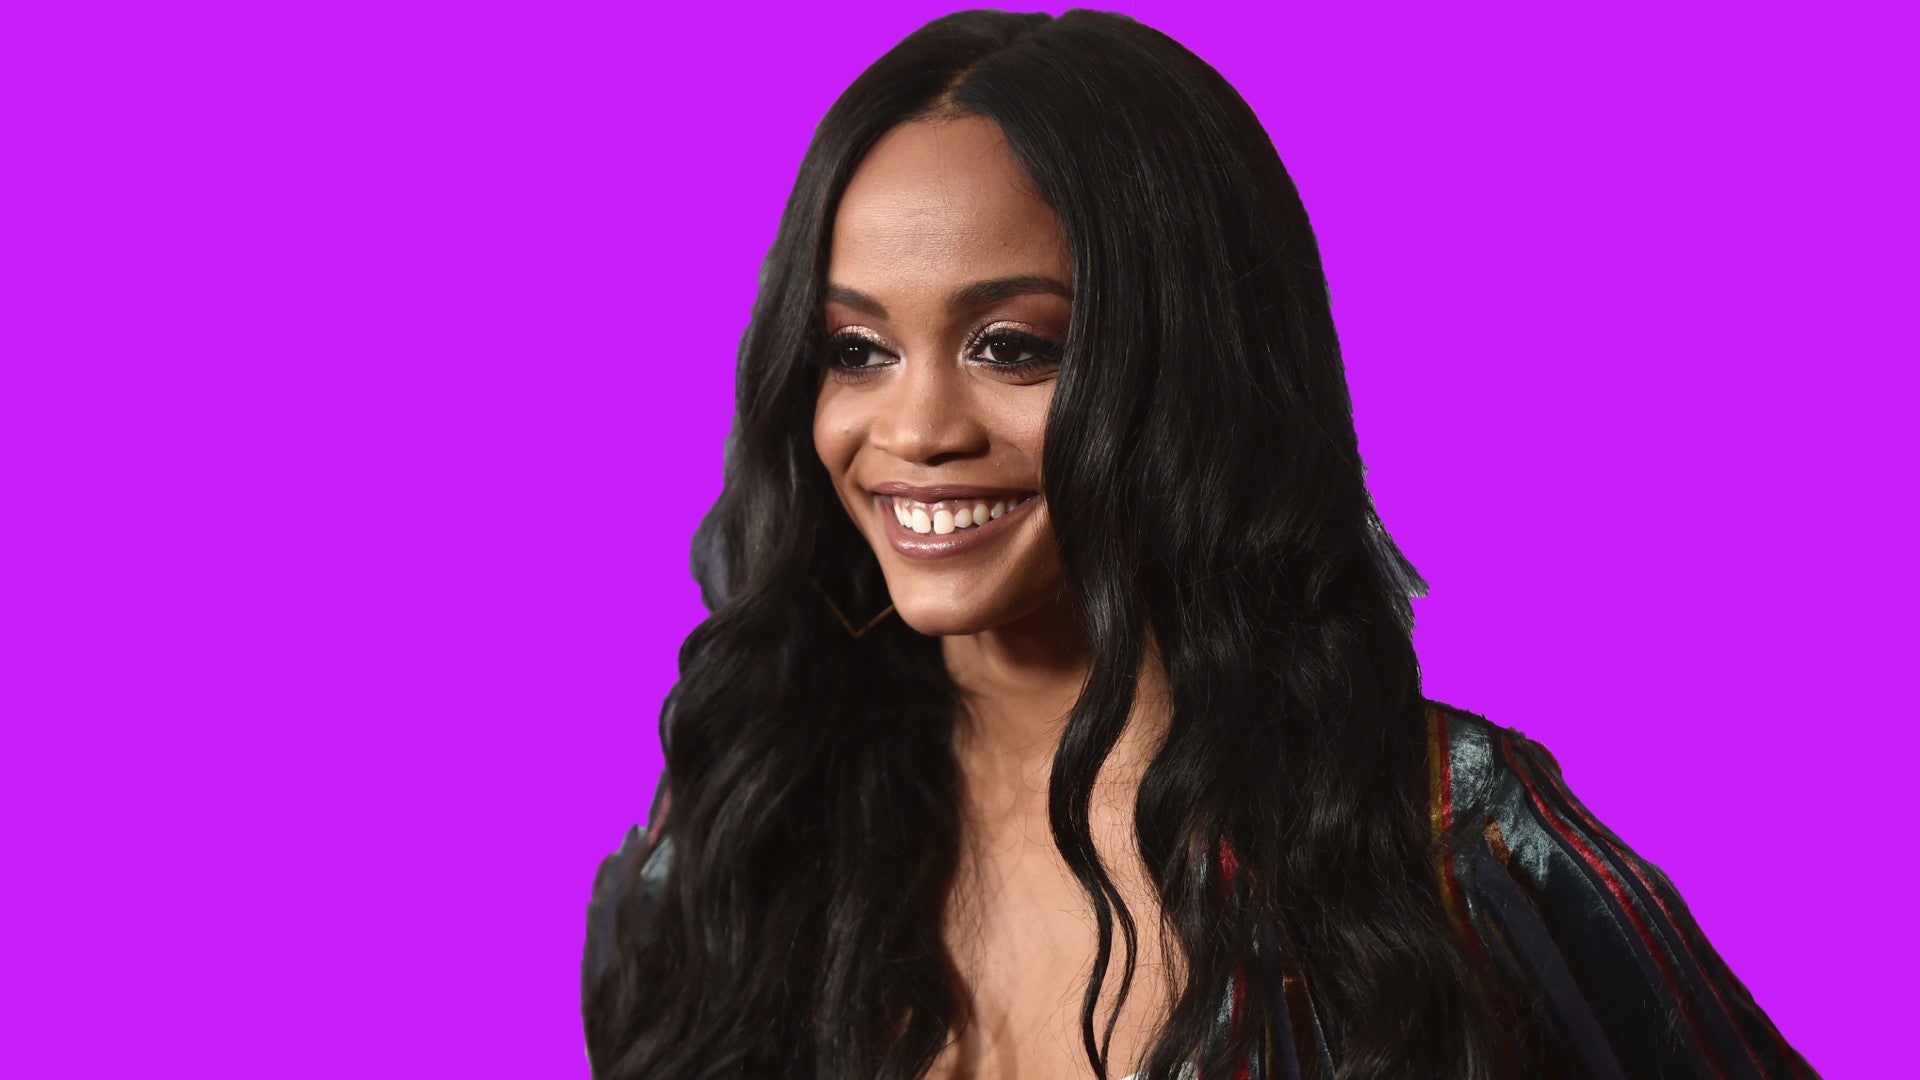 Rachel Lindsay Shares Her Hero Beauty Products For Her Big Day